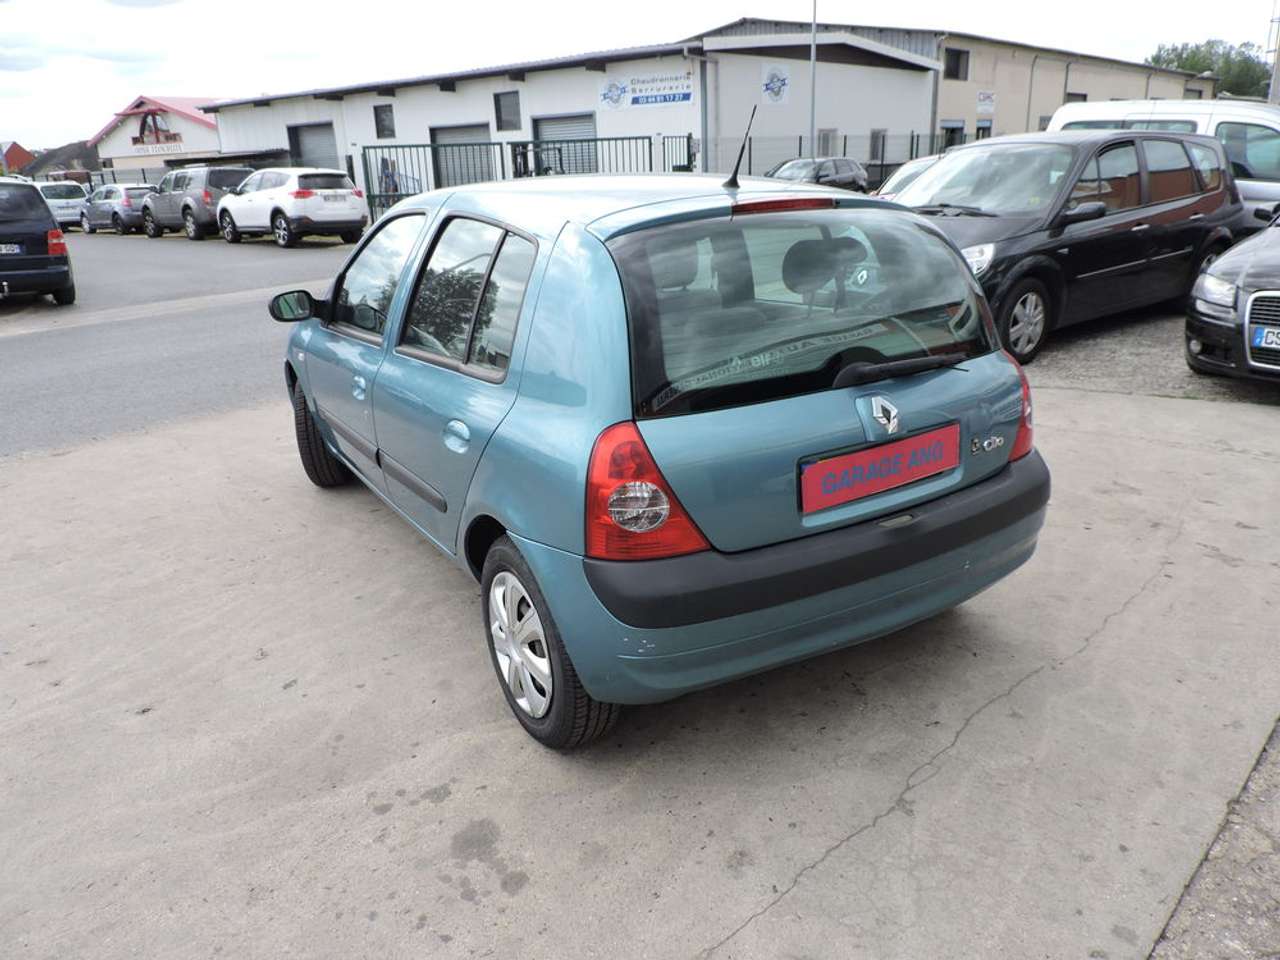 Left hand drive RENAULT CLIO 1.5 dci 80 pack clim